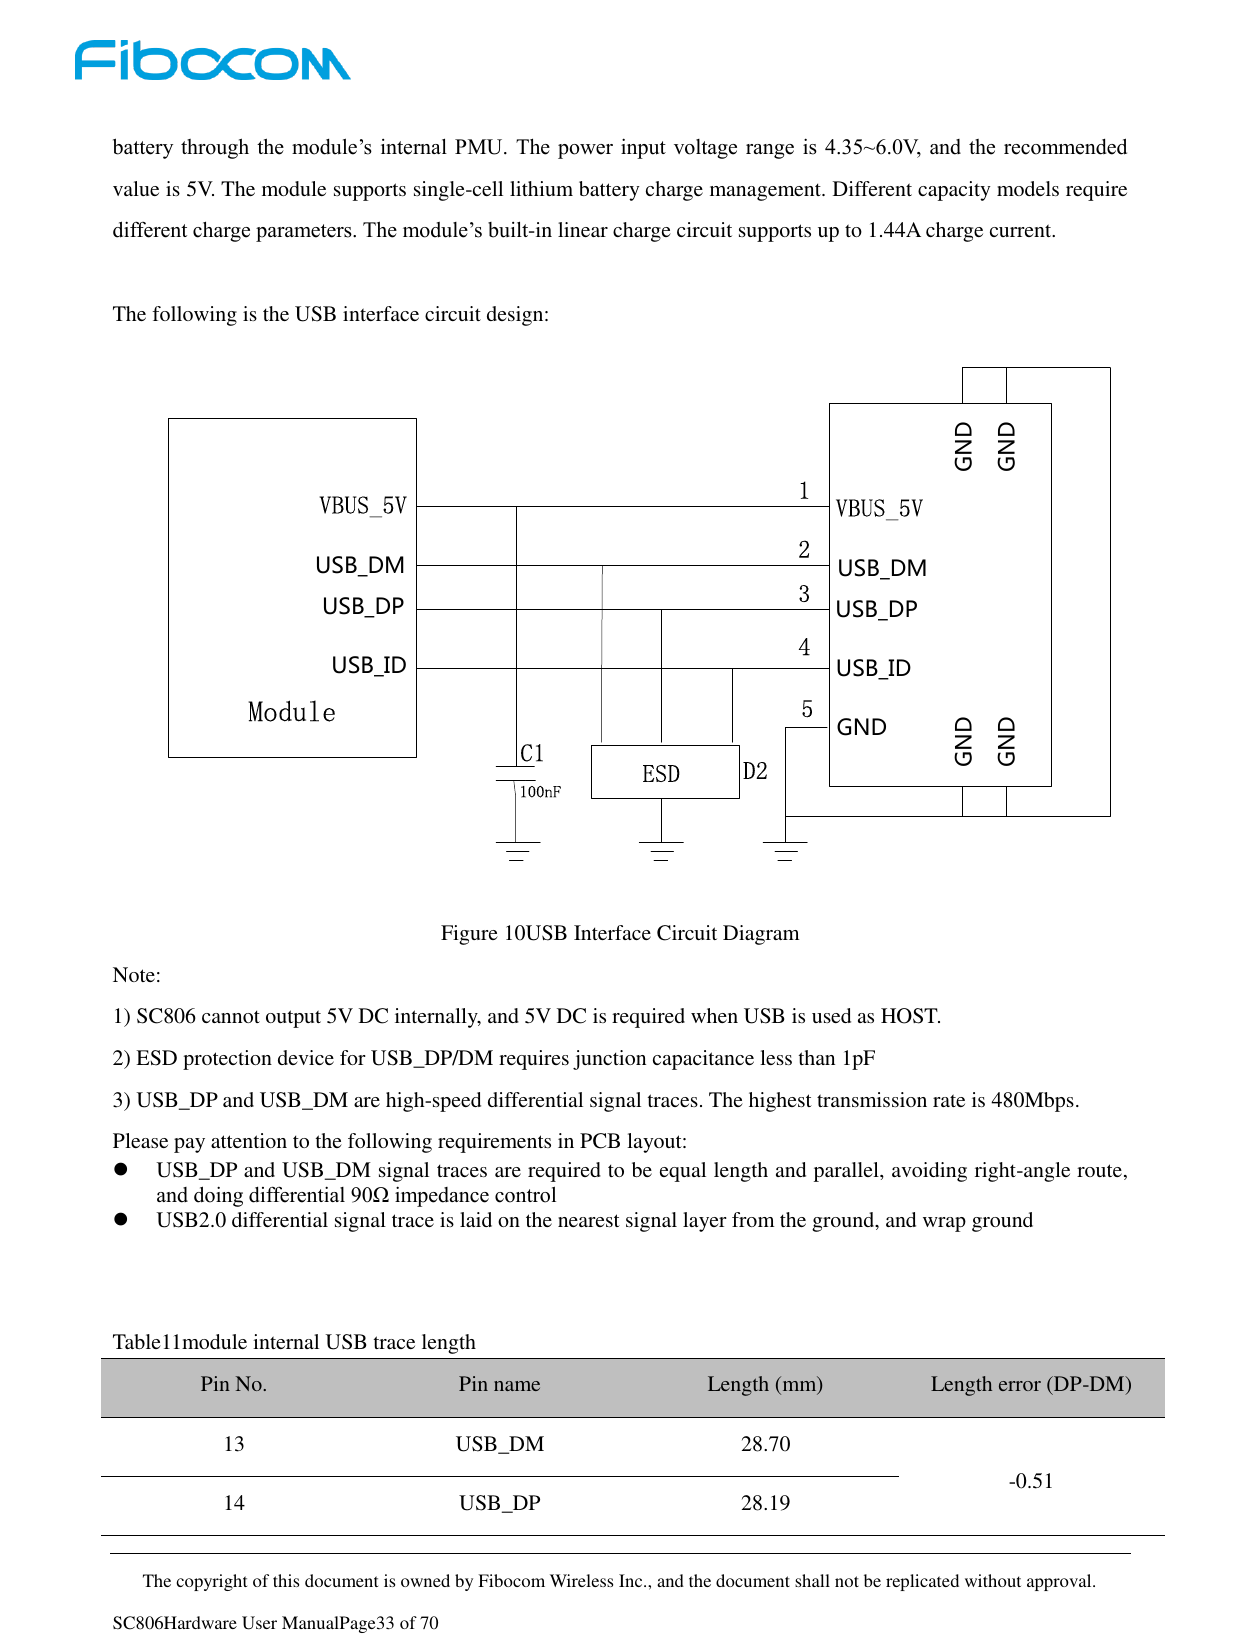     The copyright of this document is owned by Fibocom Wireless Inc., and the document shall not be replicated without approval.   SC806Hardware User ManualPage33 of 70 battery  through  the  module’s internal PMU.  The power input voltage range  is 4.35~6.0V,  and the recommended value is 5V. The module supports single-cell lithium battery charge management. Different capacity models require different charge parameters. The module’s built-in linear charge circuit supports up to 1.44A charge current.  The following is the USB interface circuit design:  Figure 10USB Interface Circuit Diagram Note: 1) SC806 cannot output 5V DC internally, and 5V DC is required when USB is used as HOST. 2) ESD protection device for USB_DP/DM requires junction capacitance less than 1pF 3) USB_DP and USB_DM are high-speed differential signal traces. The highest transmission rate is 480Mbps. Please pay attention to the following requirements in PCB layout:  USB_DP and USB_DM signal traces are required to be equal length and parallel, avoiding right-angle route, and doing differential 90Ω impedance control  USB2.0 differential signal trace is laid on the nearest signal layer from the ground, and wrap ground   Table11module internal USB trace length Pin No. Pin name Length (mm) Length error (DP-DM) 13 USB_DM 28.70 -0.51 14 USB_DP 28.19 VBUS_5VUSB_DMUSB_DPUSB_IDGNDGNDGNDGNDGNDUSB_DMUSB_DPUSB_IDVBUS_5V 12345ModuleD2C1100nF ESD